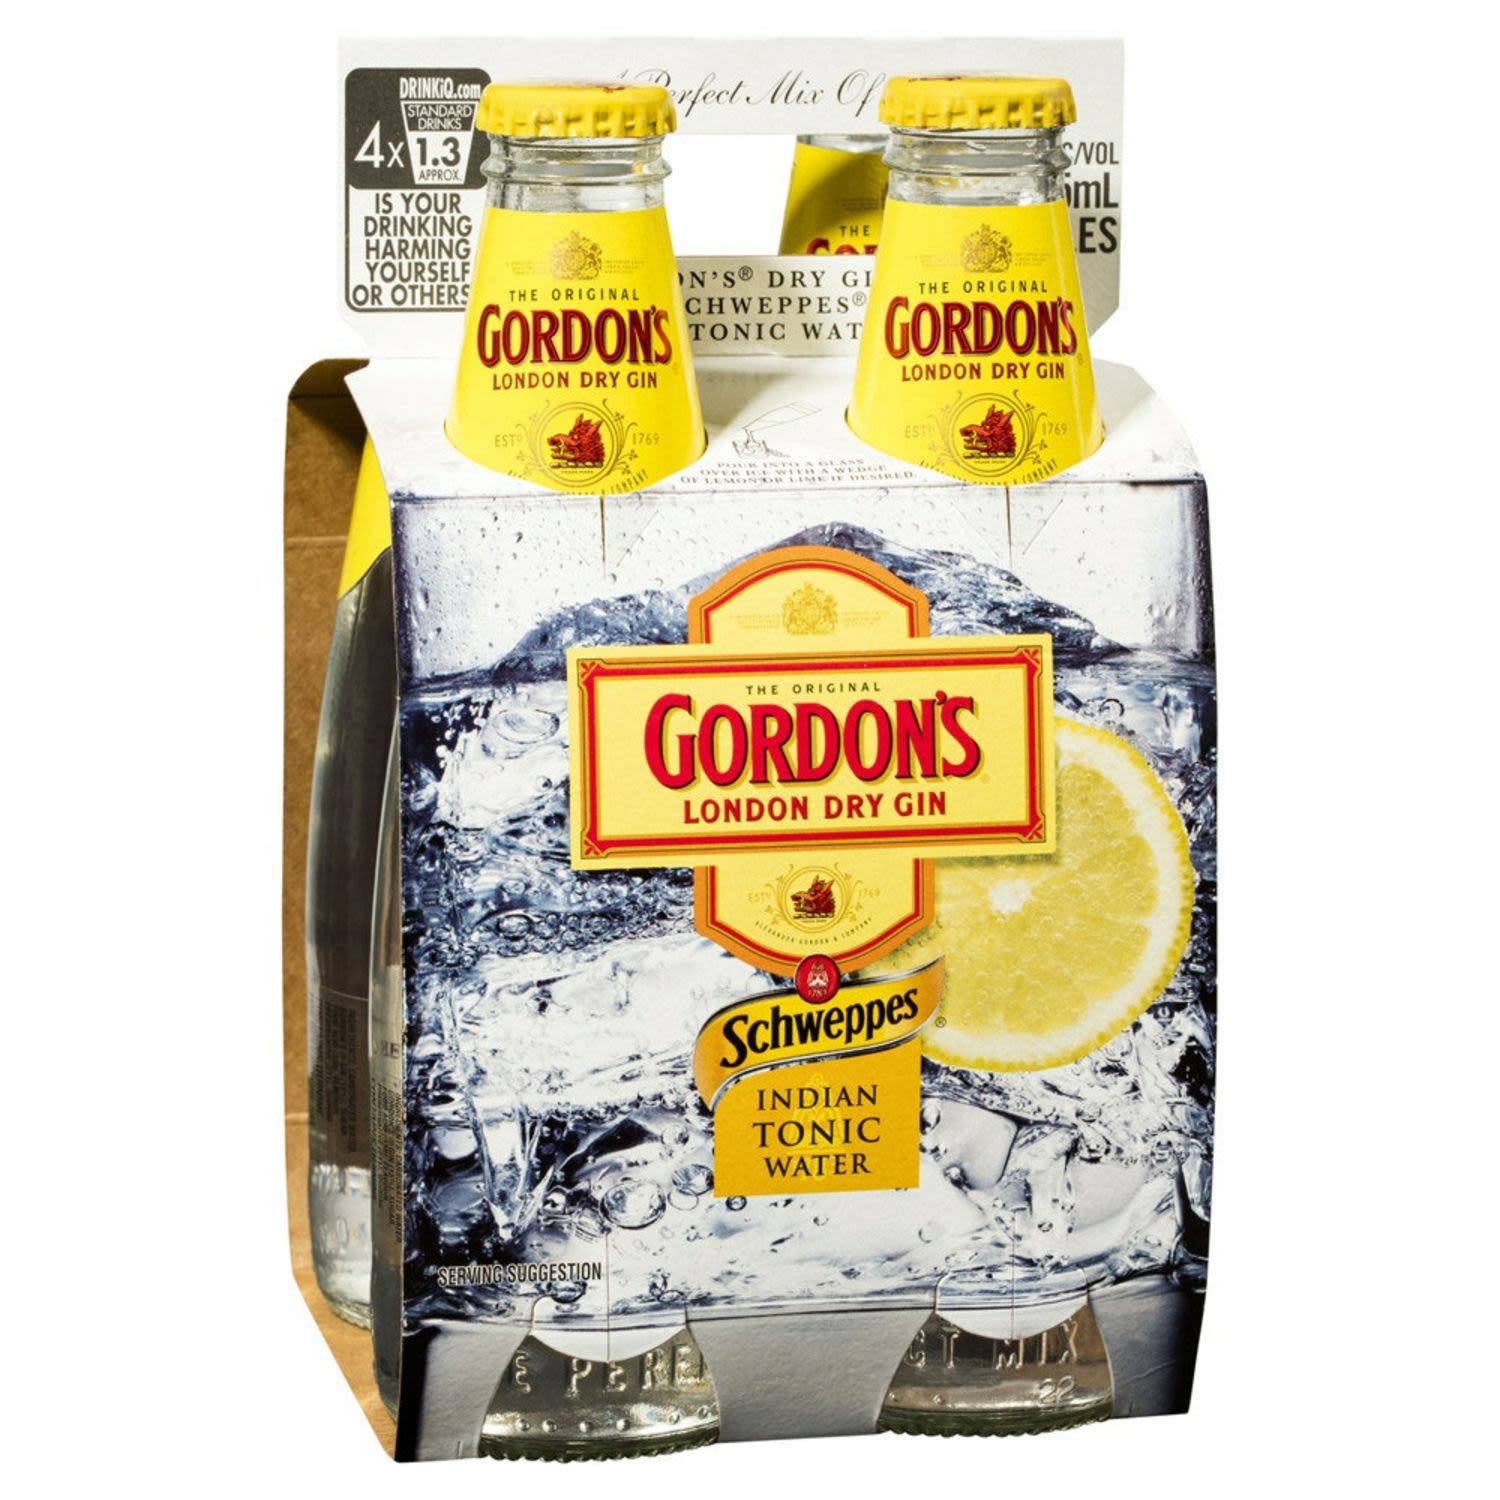 The distinctively refreshing taste comes from using only the finest ingredients including juniper, coriander seeds and angelica root, lengthened with the perfect balance of Tonic water.<br /> <br />Alcohol Volume: 6.00%<br /><br />Pack Format: 4 Pack<br /><br />Standard Drinks: 1.3<br /><br />Pack Type: Bottle<br /><br />Country of Origin: Scotland<br />